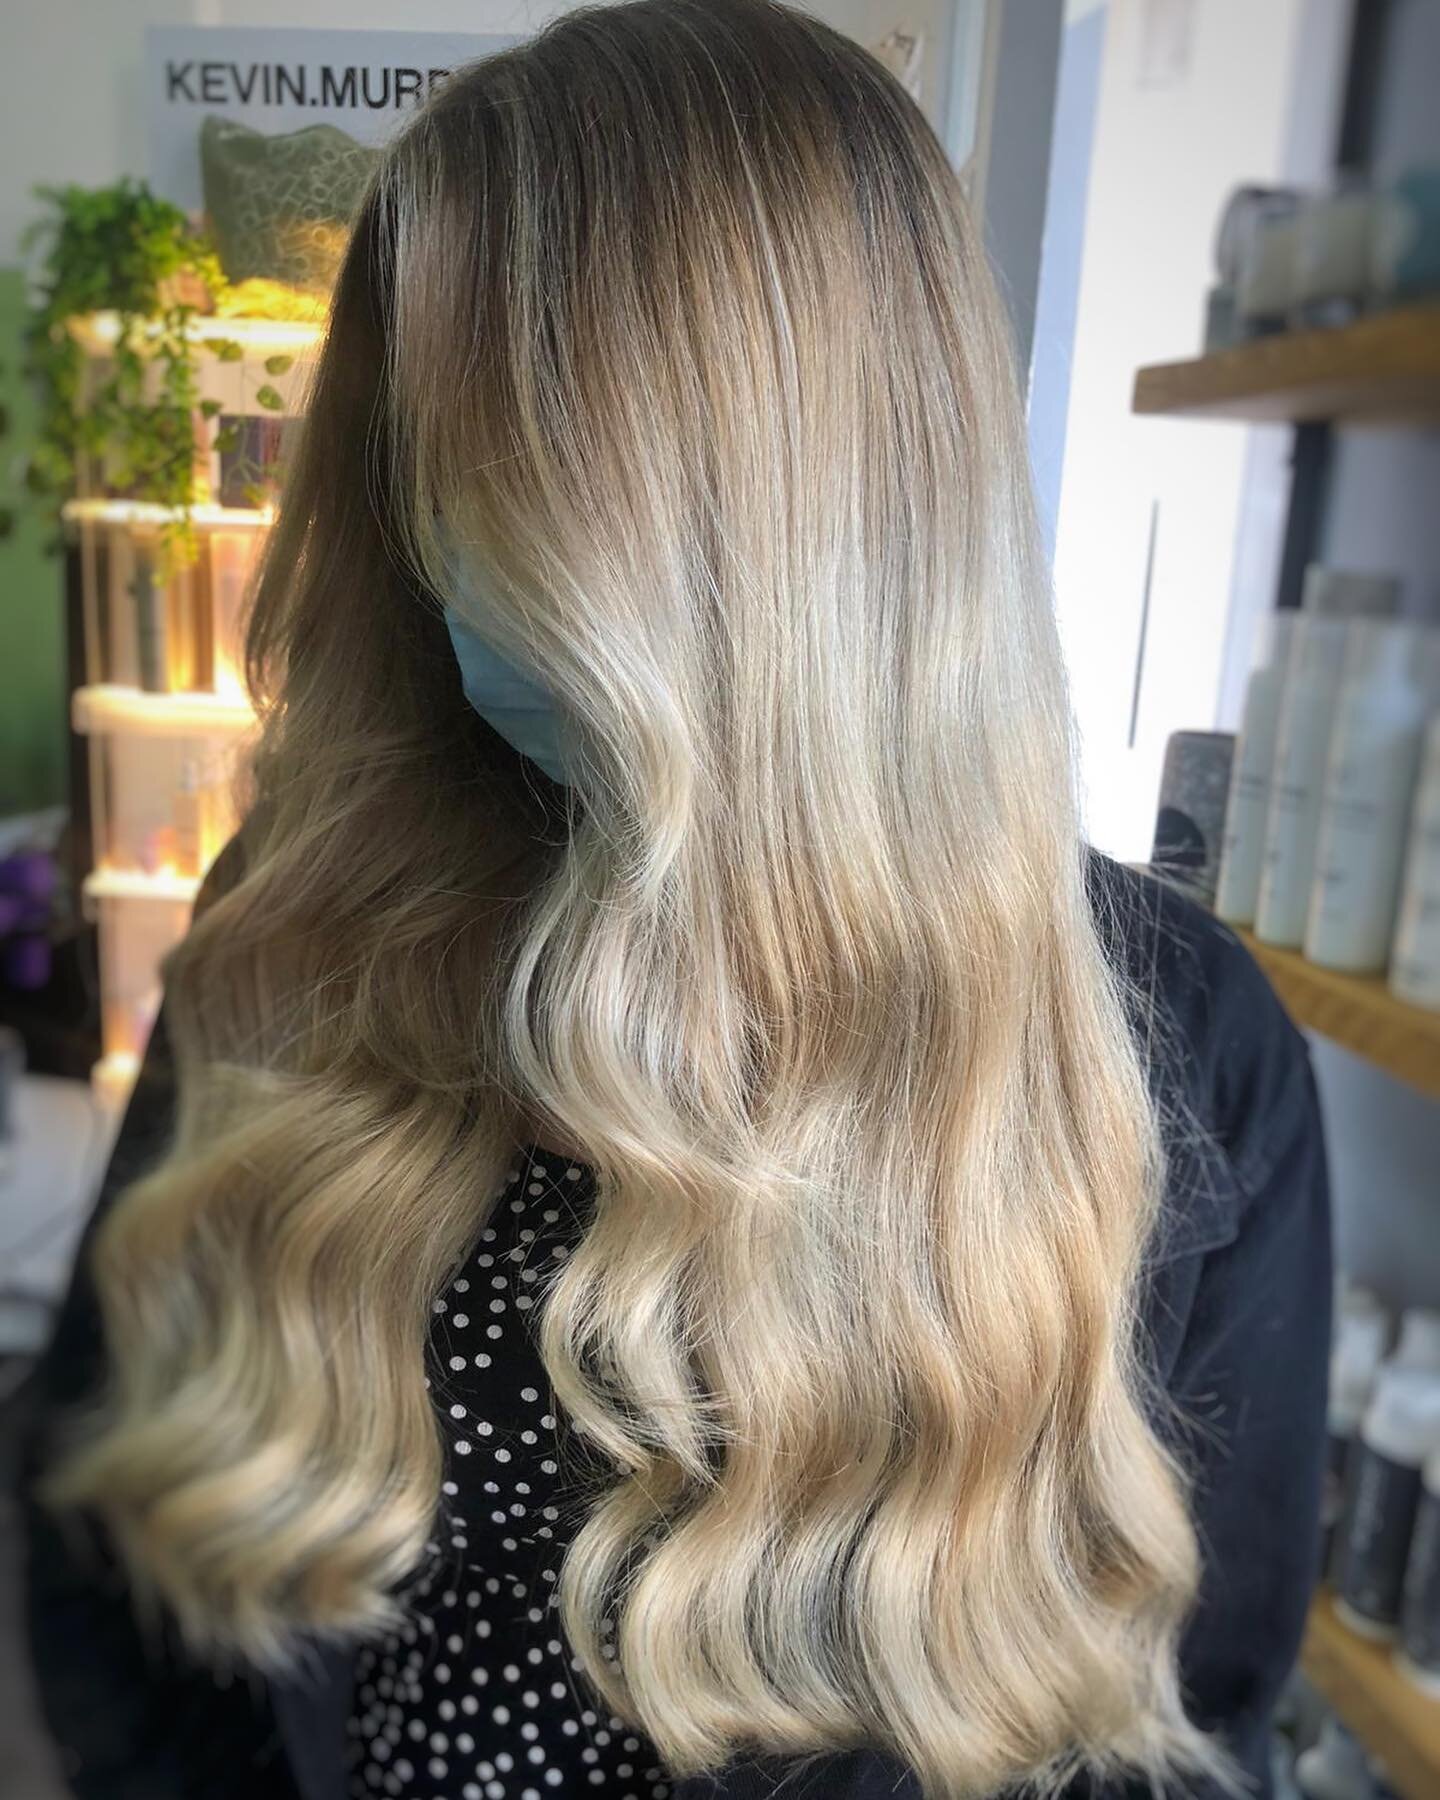 SOFTEN ME!! Swipe for before! 👉🏻👉🏻👉🏻

The most STUNNING look today from our Katie! 

TECHNIQUE: balayage, toner, cutting and styling 

PRODUCTS: @kevinmurphyuk lightener, hydrate me wash  and rinse, @moodhairofficial hair milk, @divaprostyling 